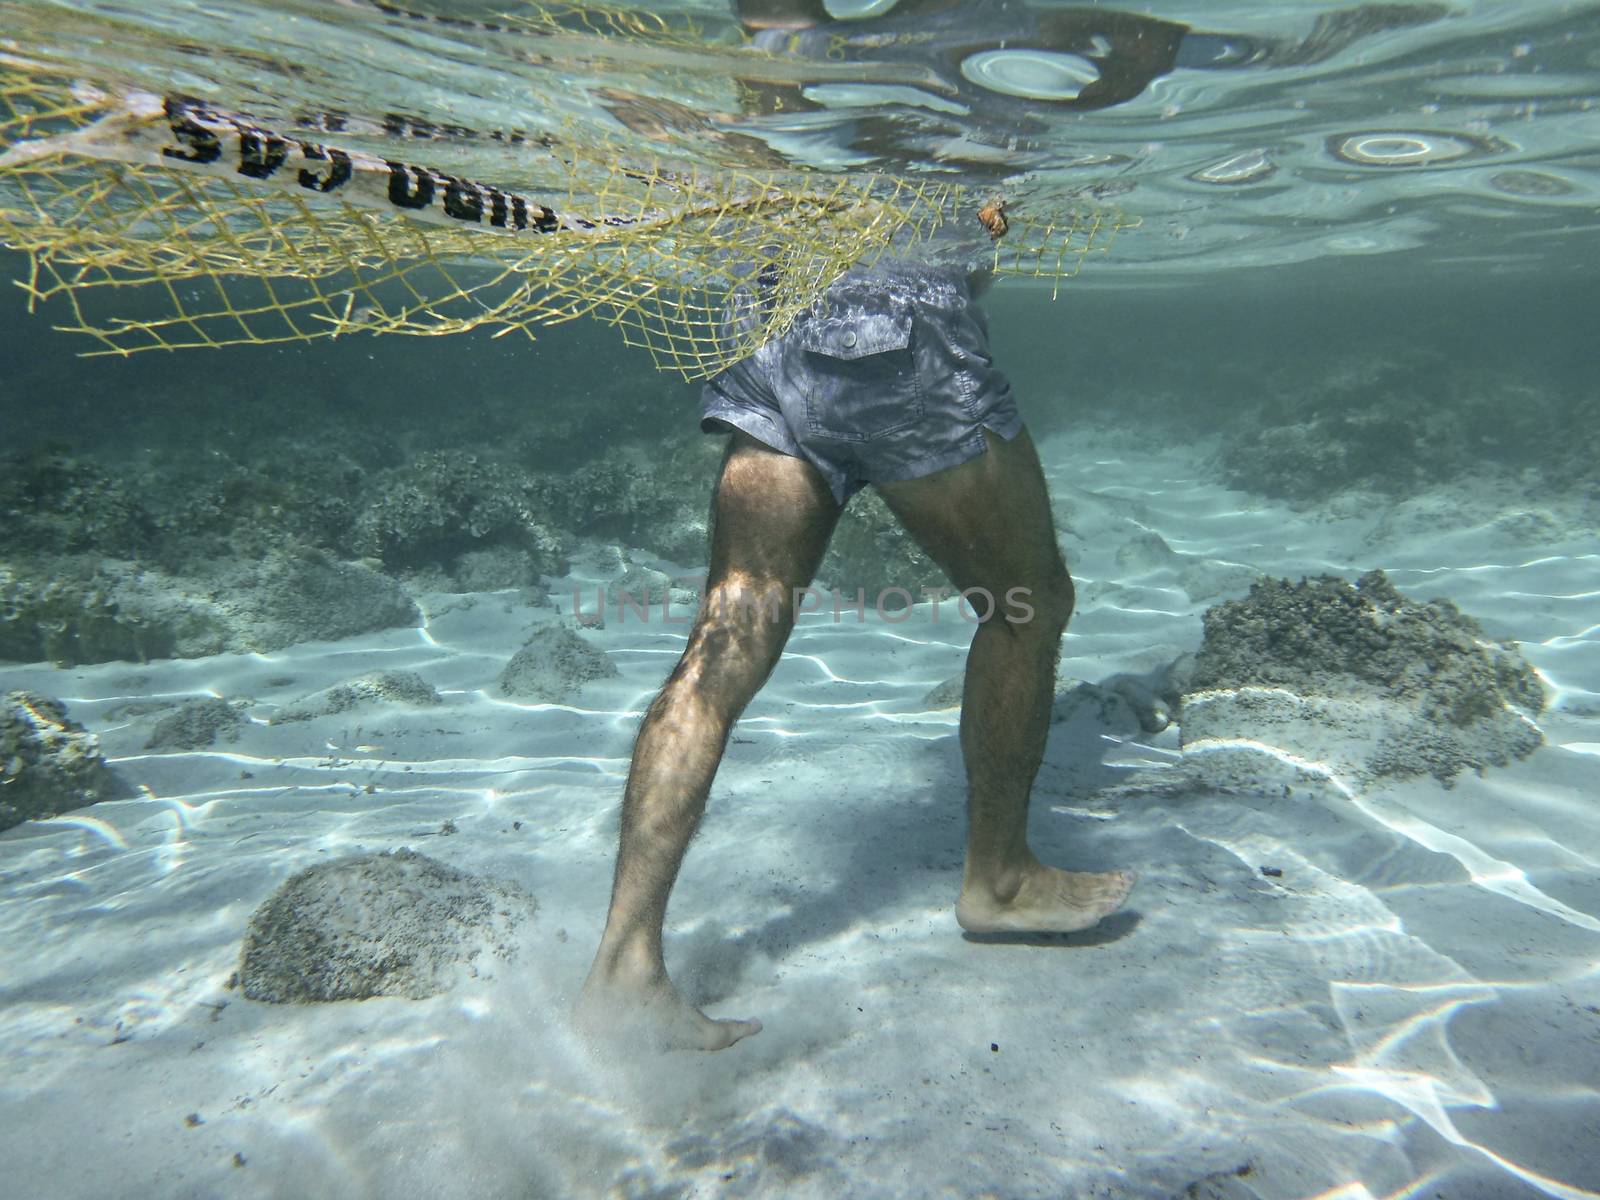 Plastic pollution in the ocean and in the sea: underwater shot of a man walking on the seabed dragging a fishing net and a piece of plastic in the crystal clear water